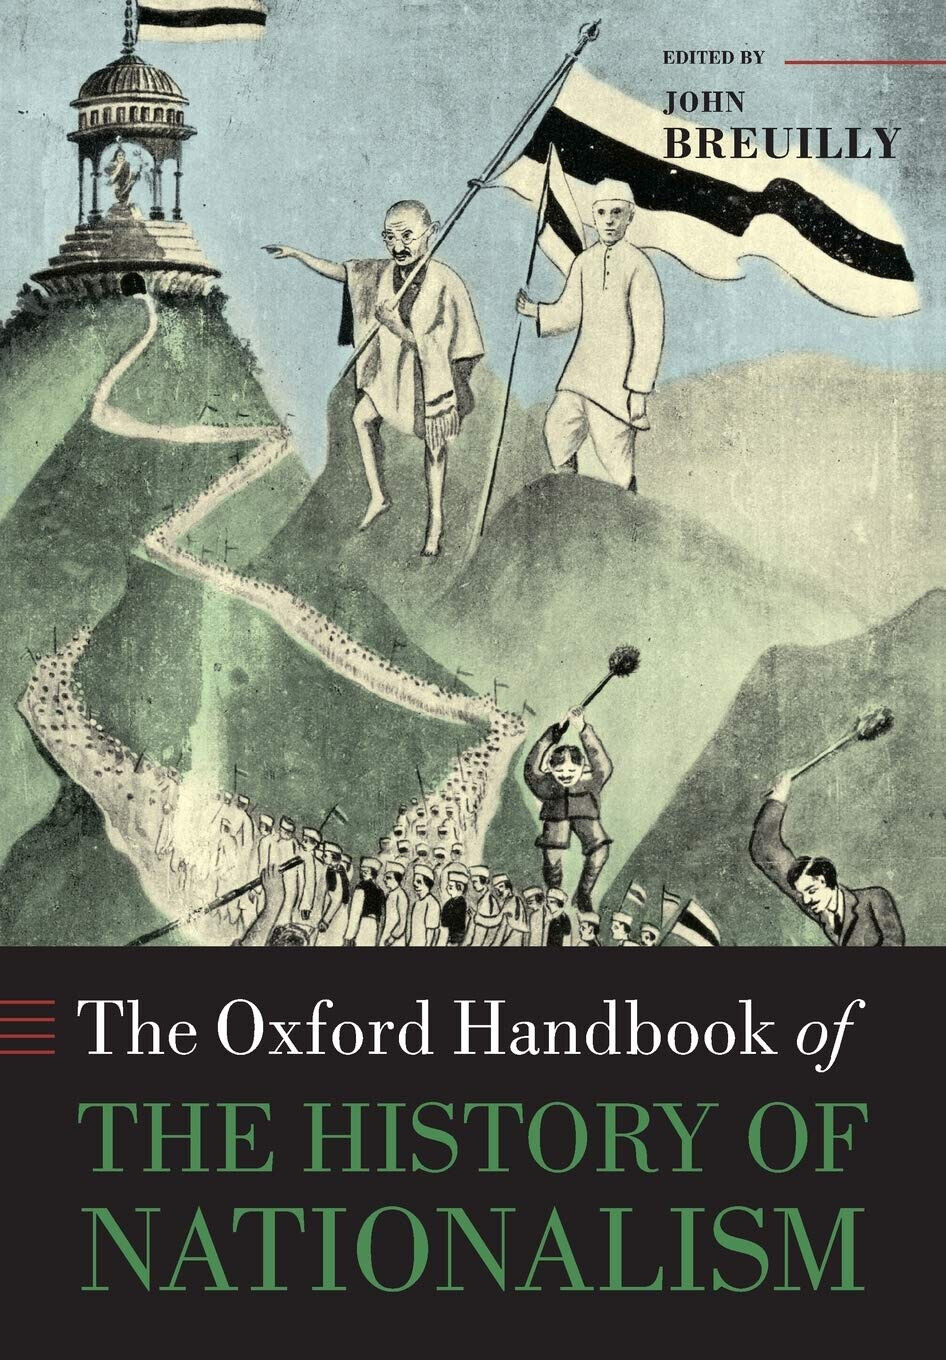 The Oxford Handbook of the History of Nationalism - John Breuilly - 2016